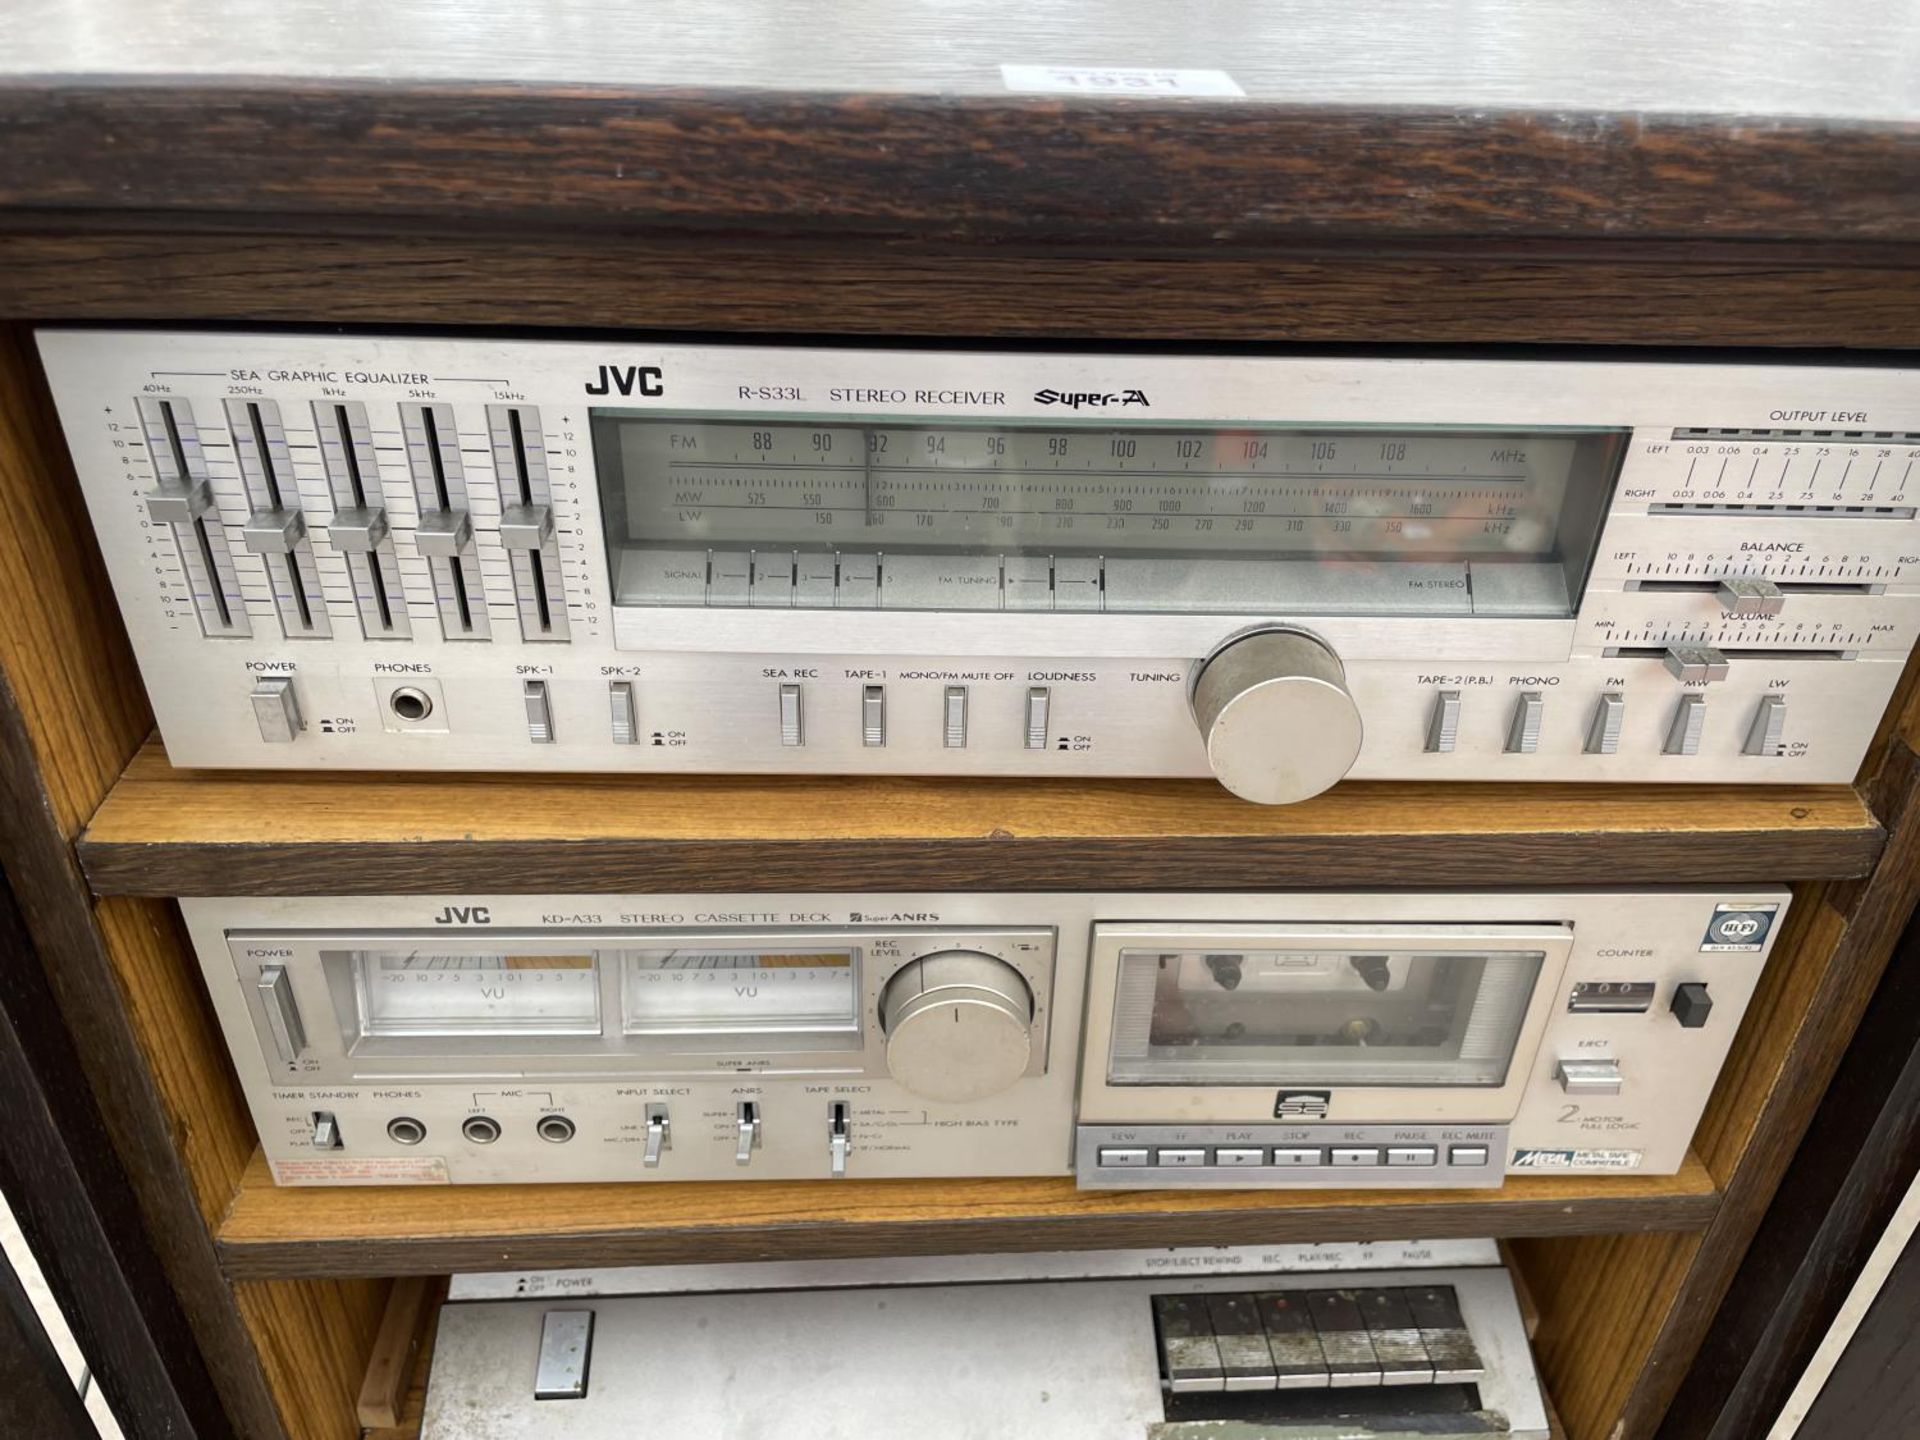 AN OAK MEDIA UNIT CONTAINING AN ASSORTMENT OF STEREO EQUIPMENT TO INCLUDE A JVC STEREO RECEIVER, A - Image 2 of 5